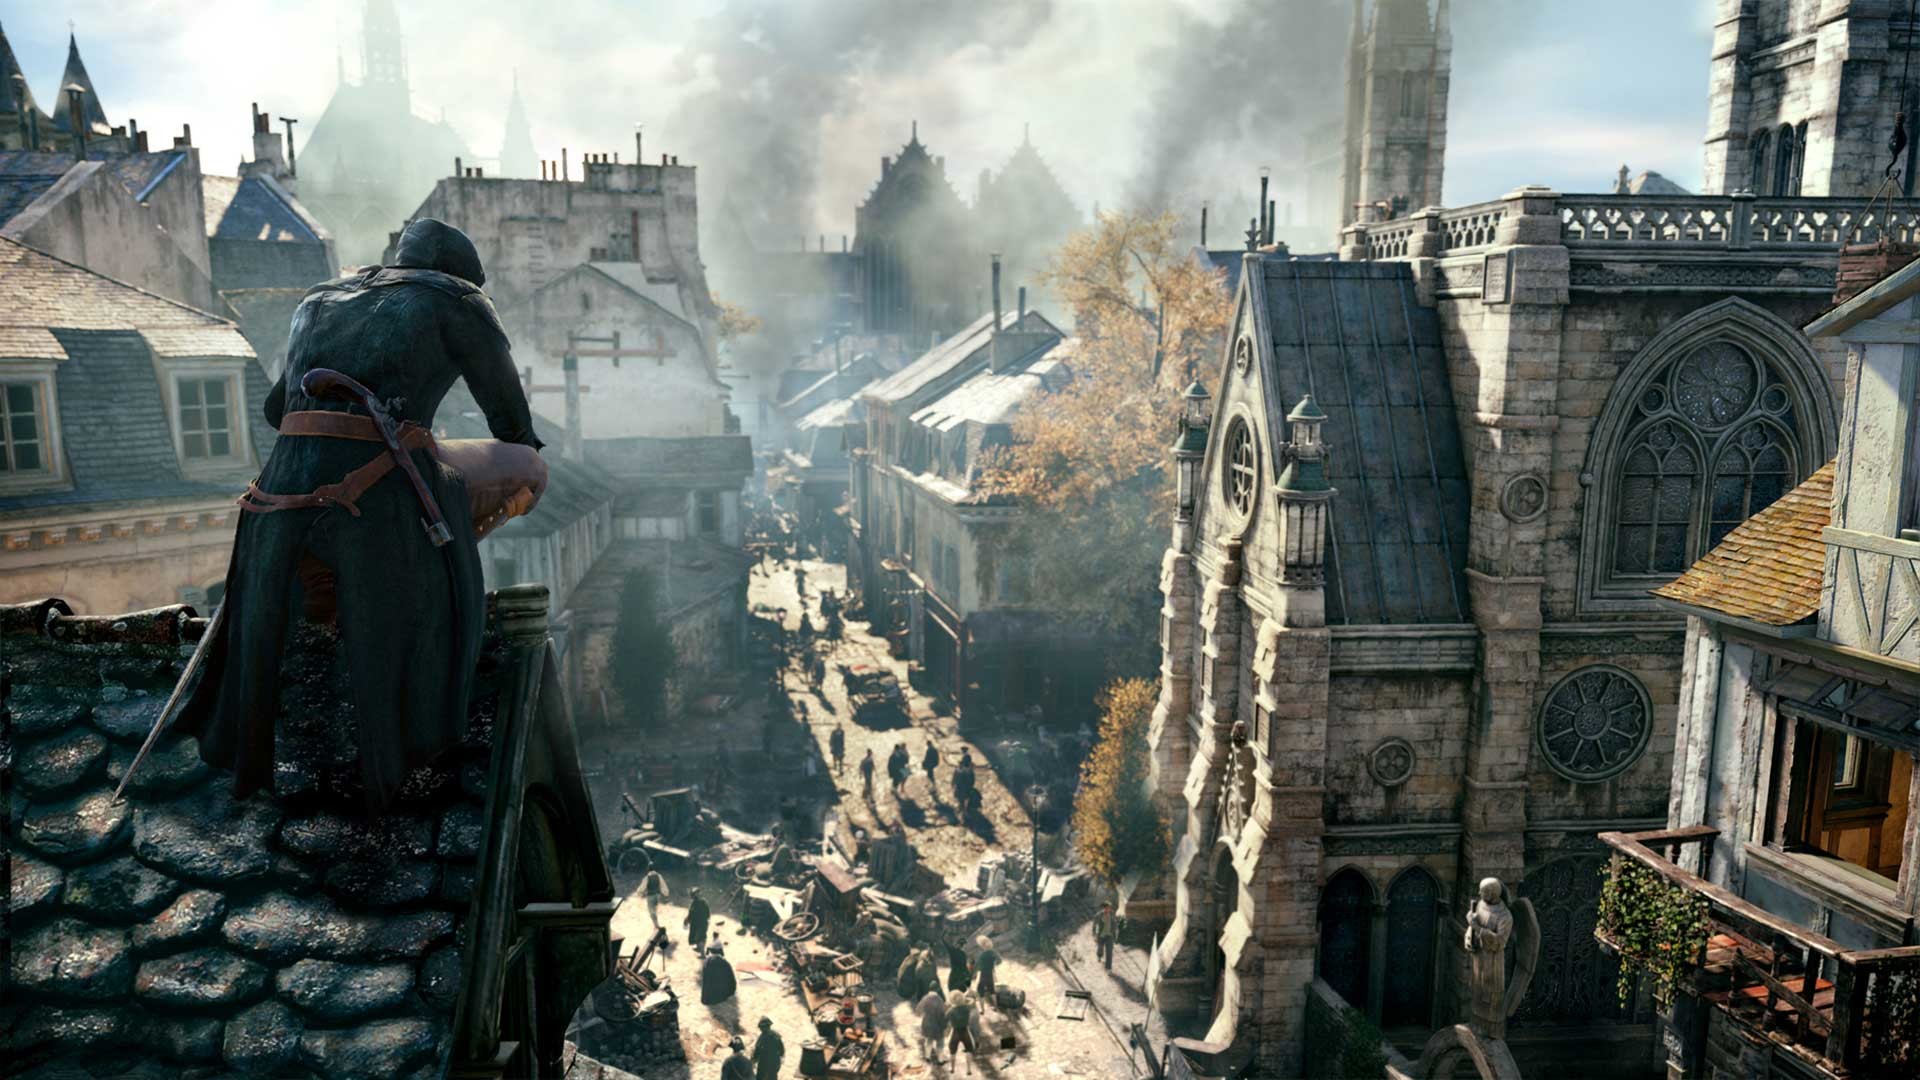 1920x1080 Video Game - Assassin's Creed: Unity Wallpaper